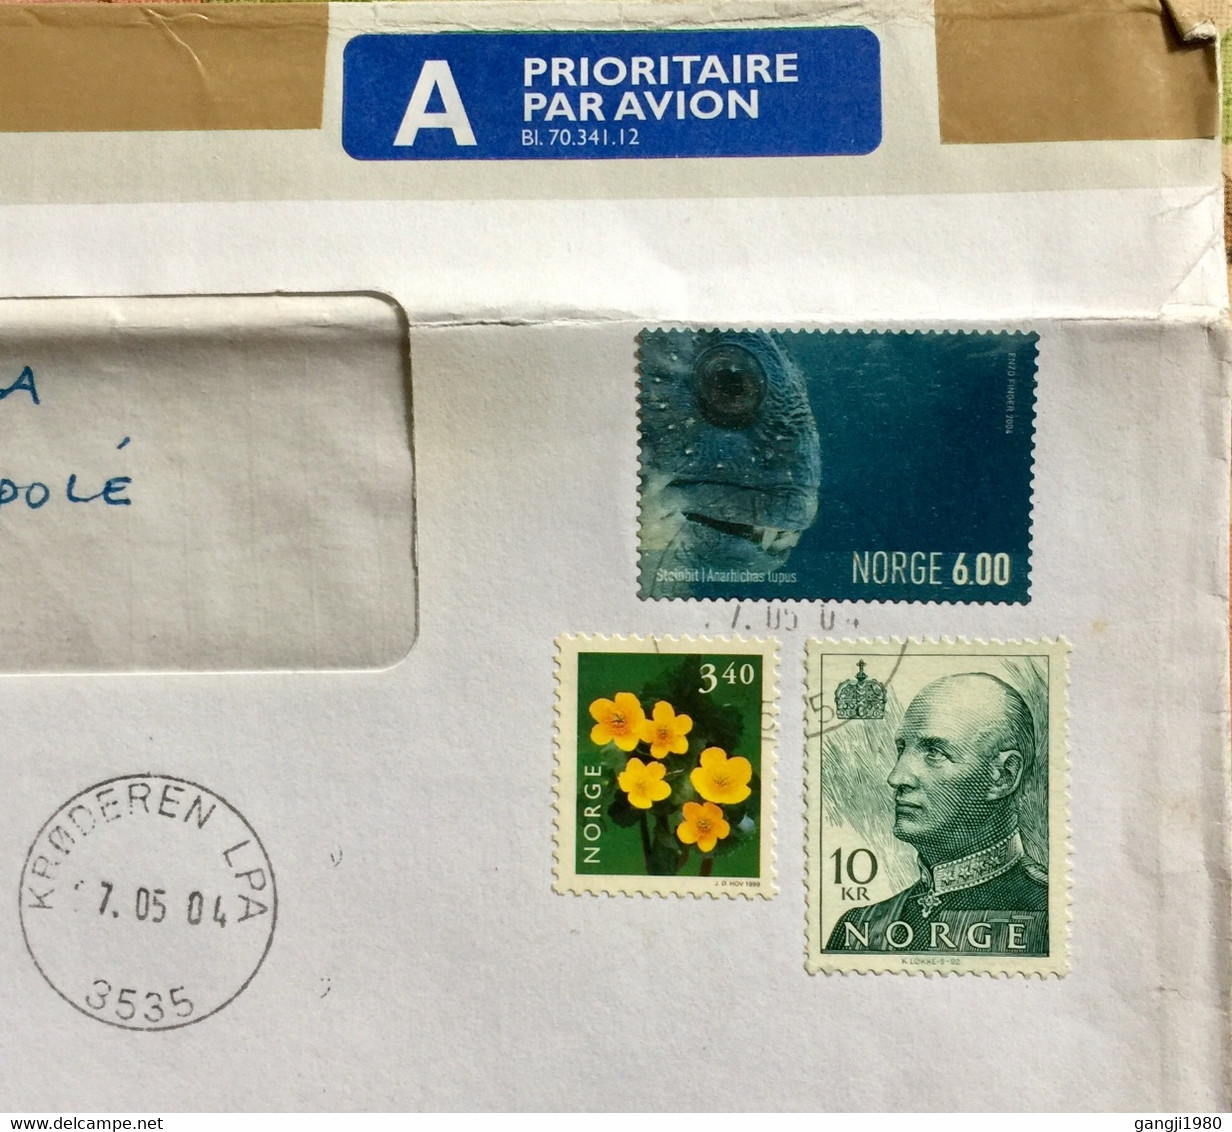 NORWAY 2004,AIRMAIL USED COVER TO LITHUANIA, KRODERN LPA,MARIJAMPOLE, CANCELLATION,19=40 KROWN RATE !!! FISH ,FLOWER, - Storia Postale